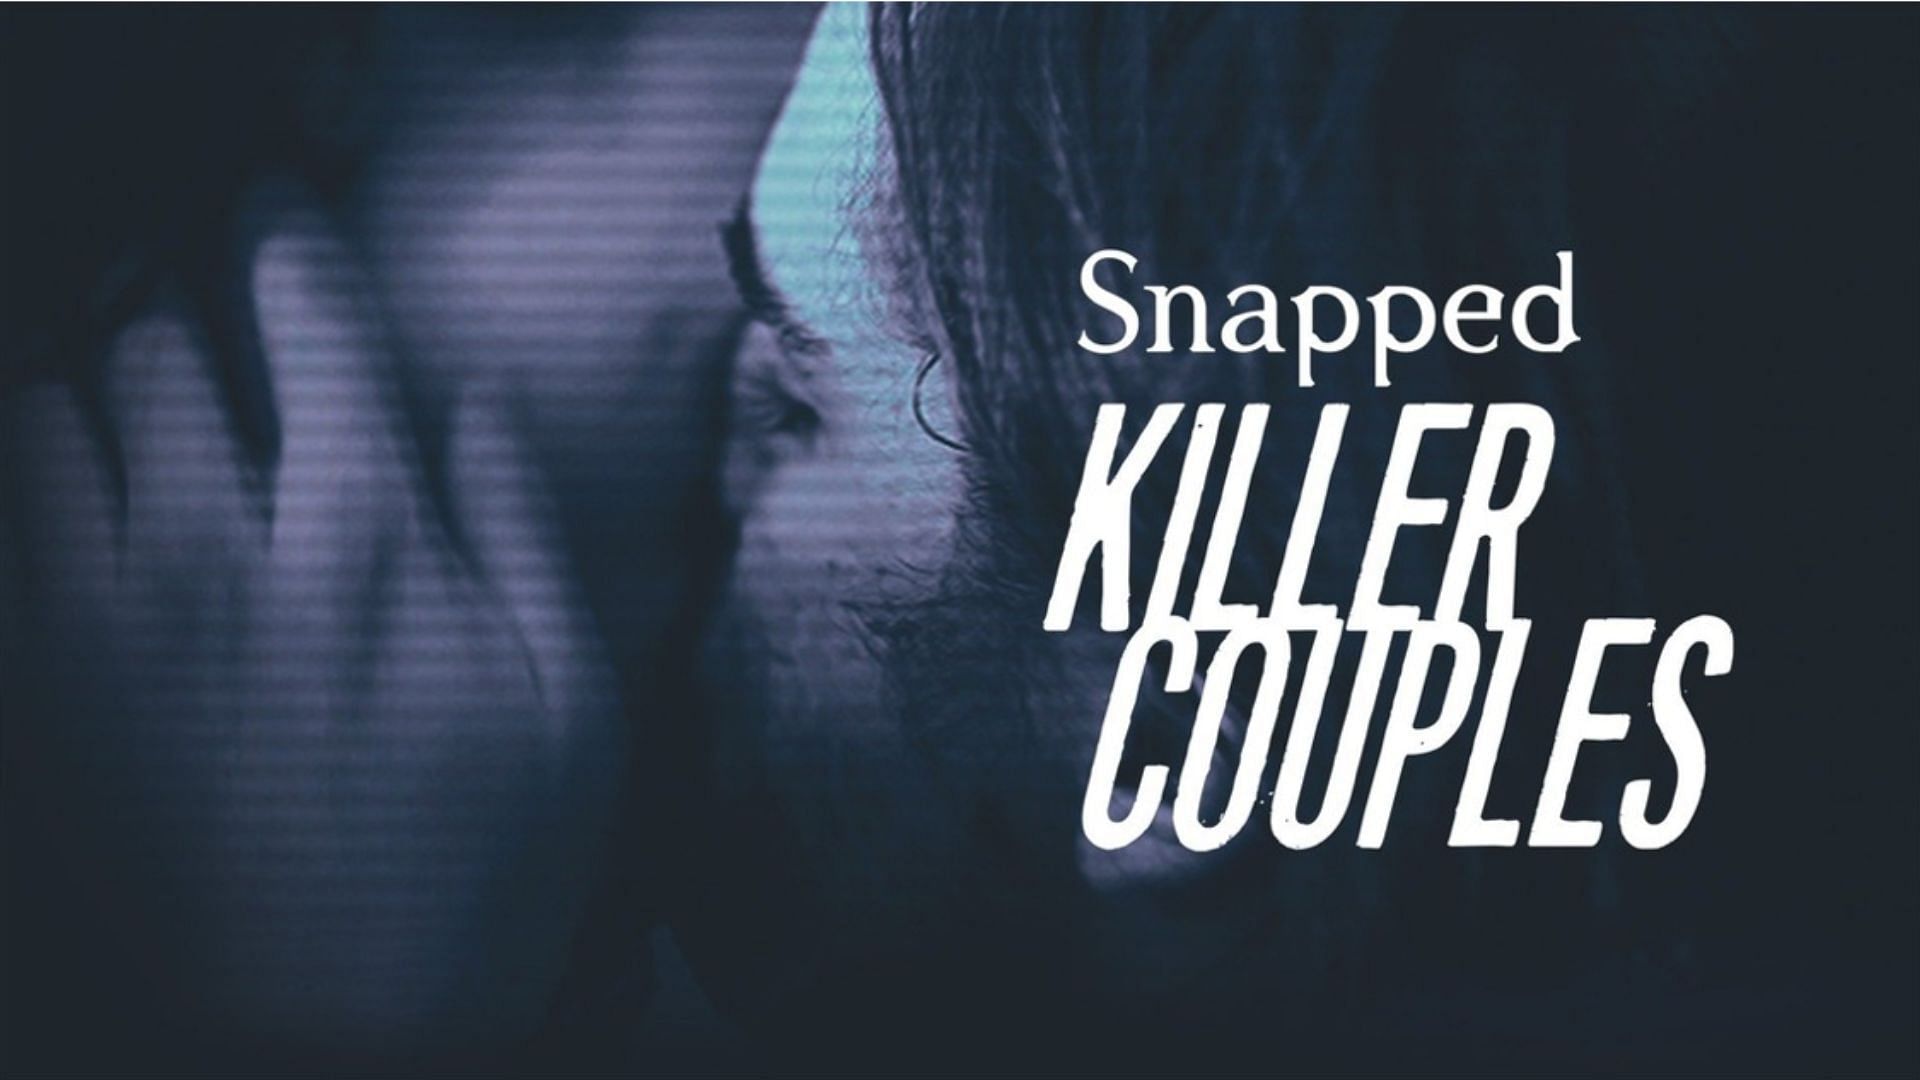 Snapped: Killer Couples (Image via Rotten Tomatoes)